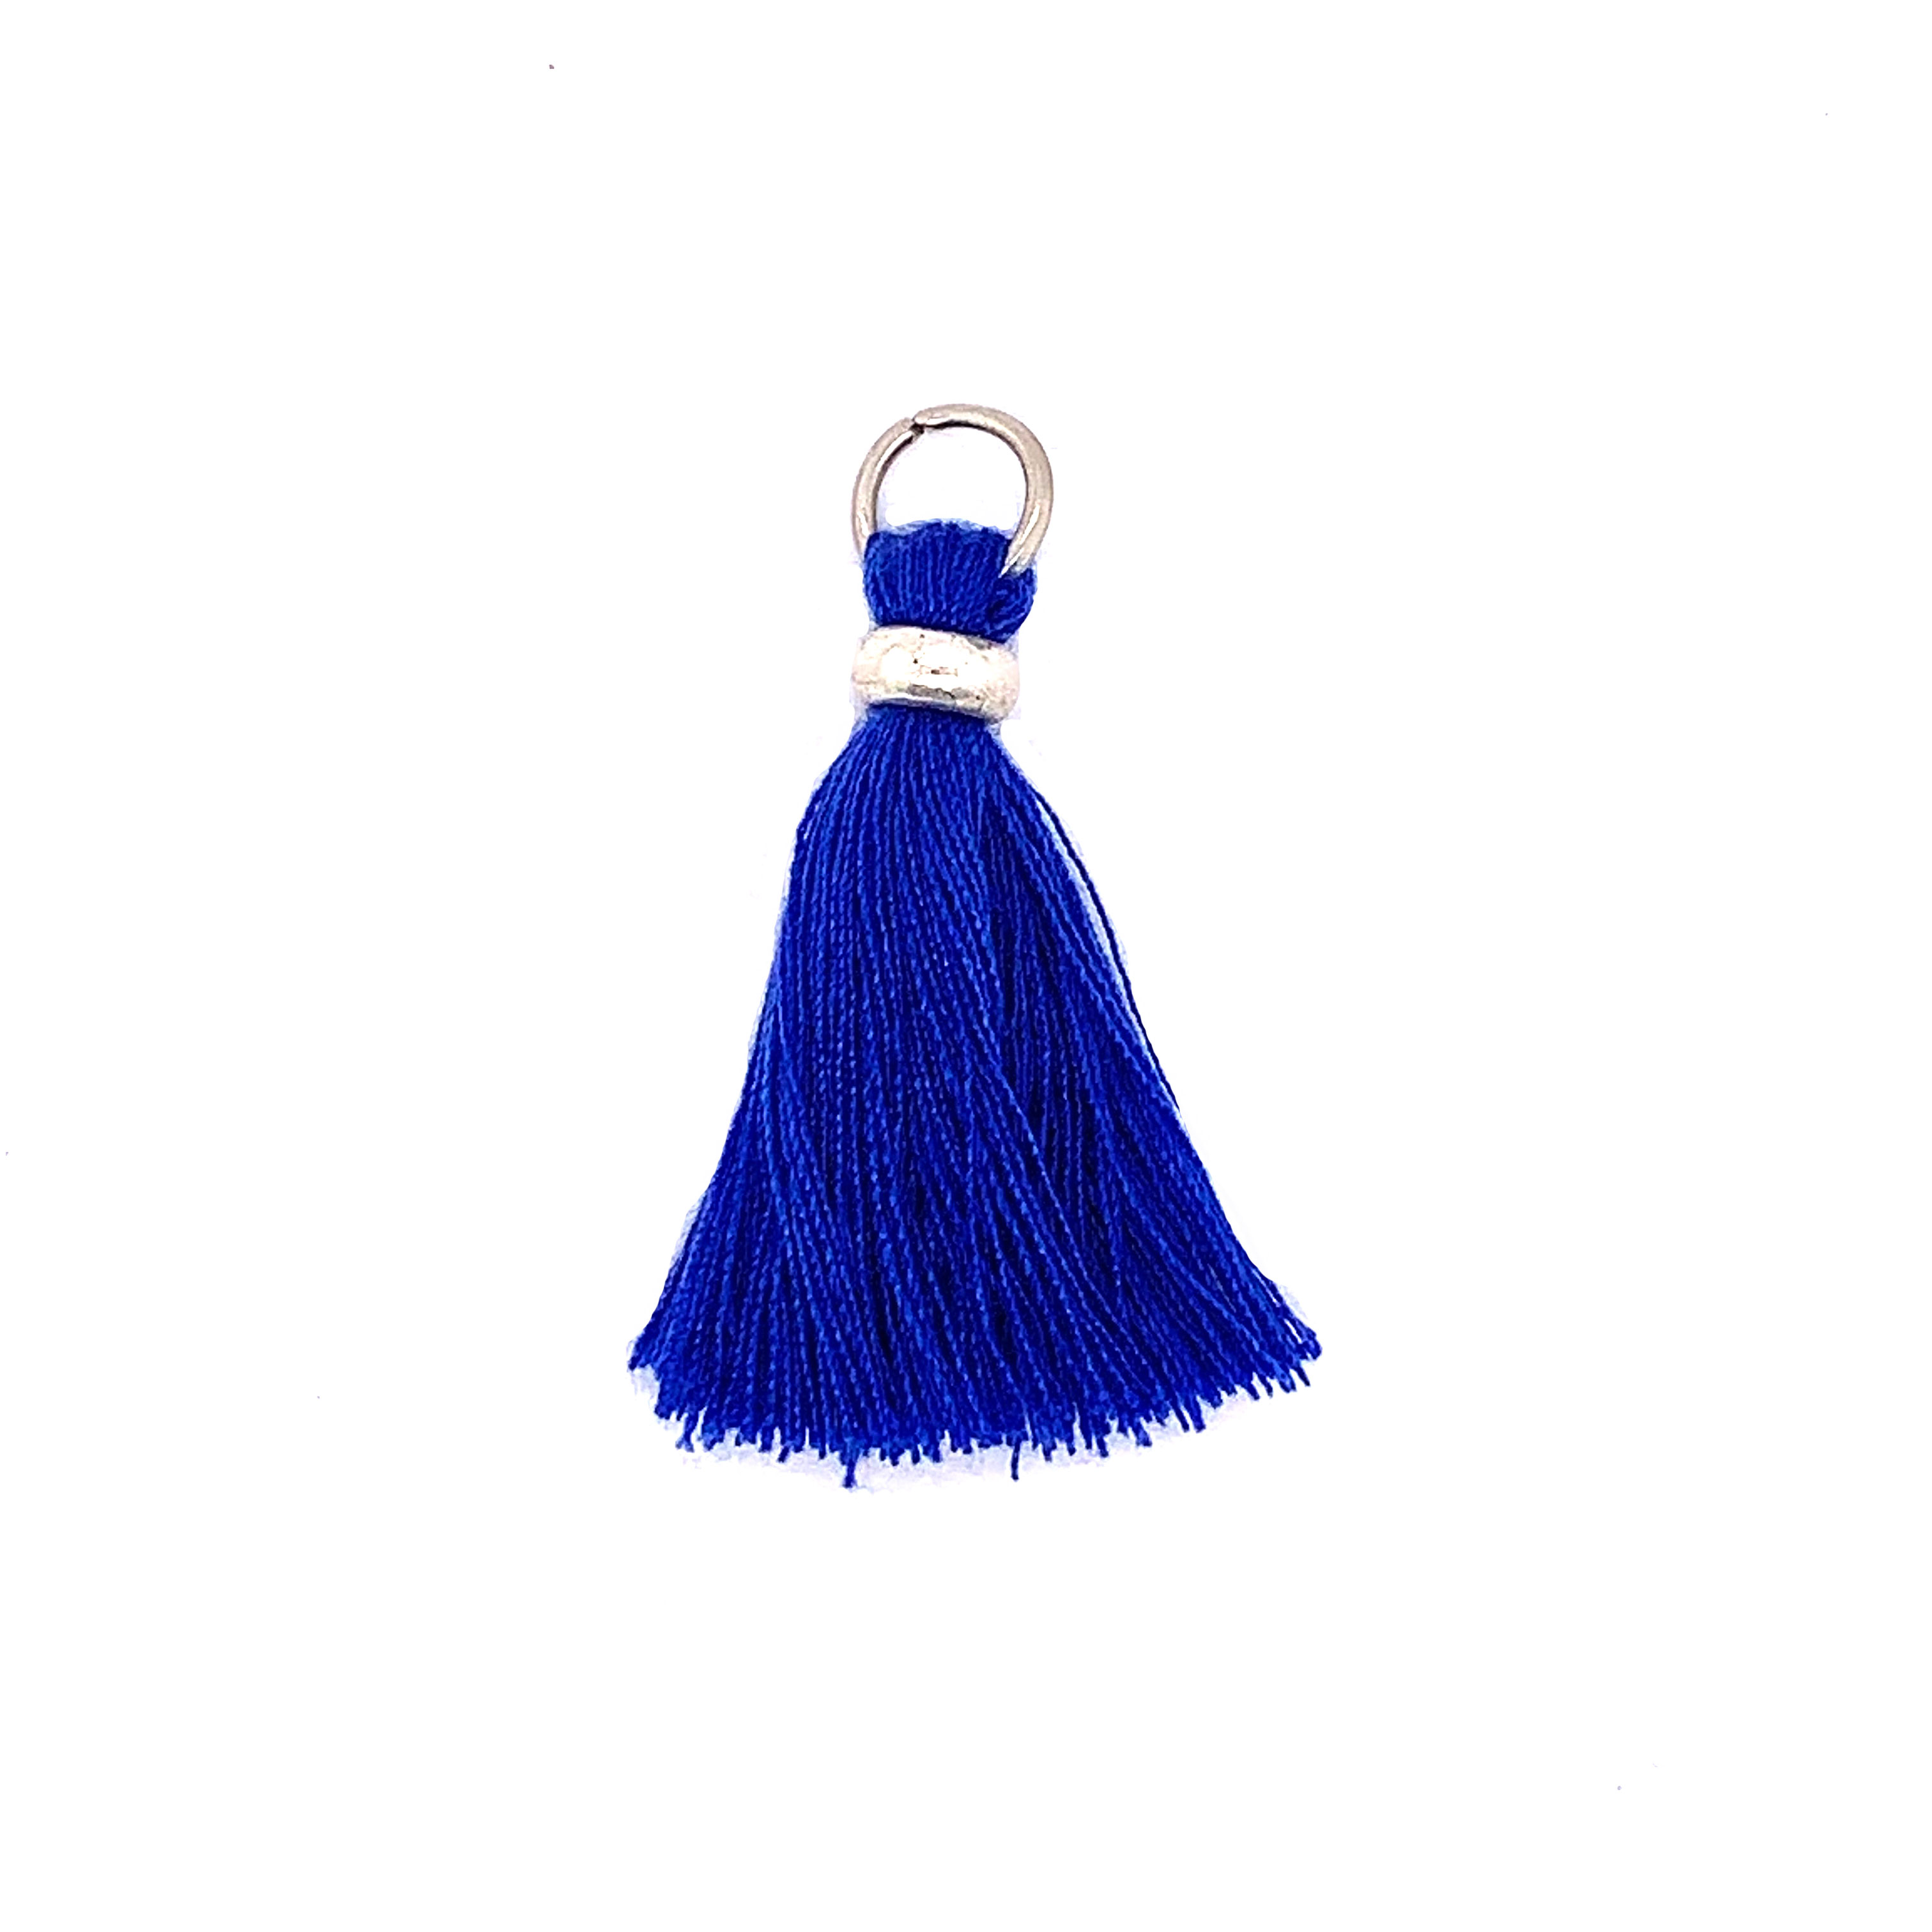 Blue Tassel with Silver Ring & Silver Jump Ring